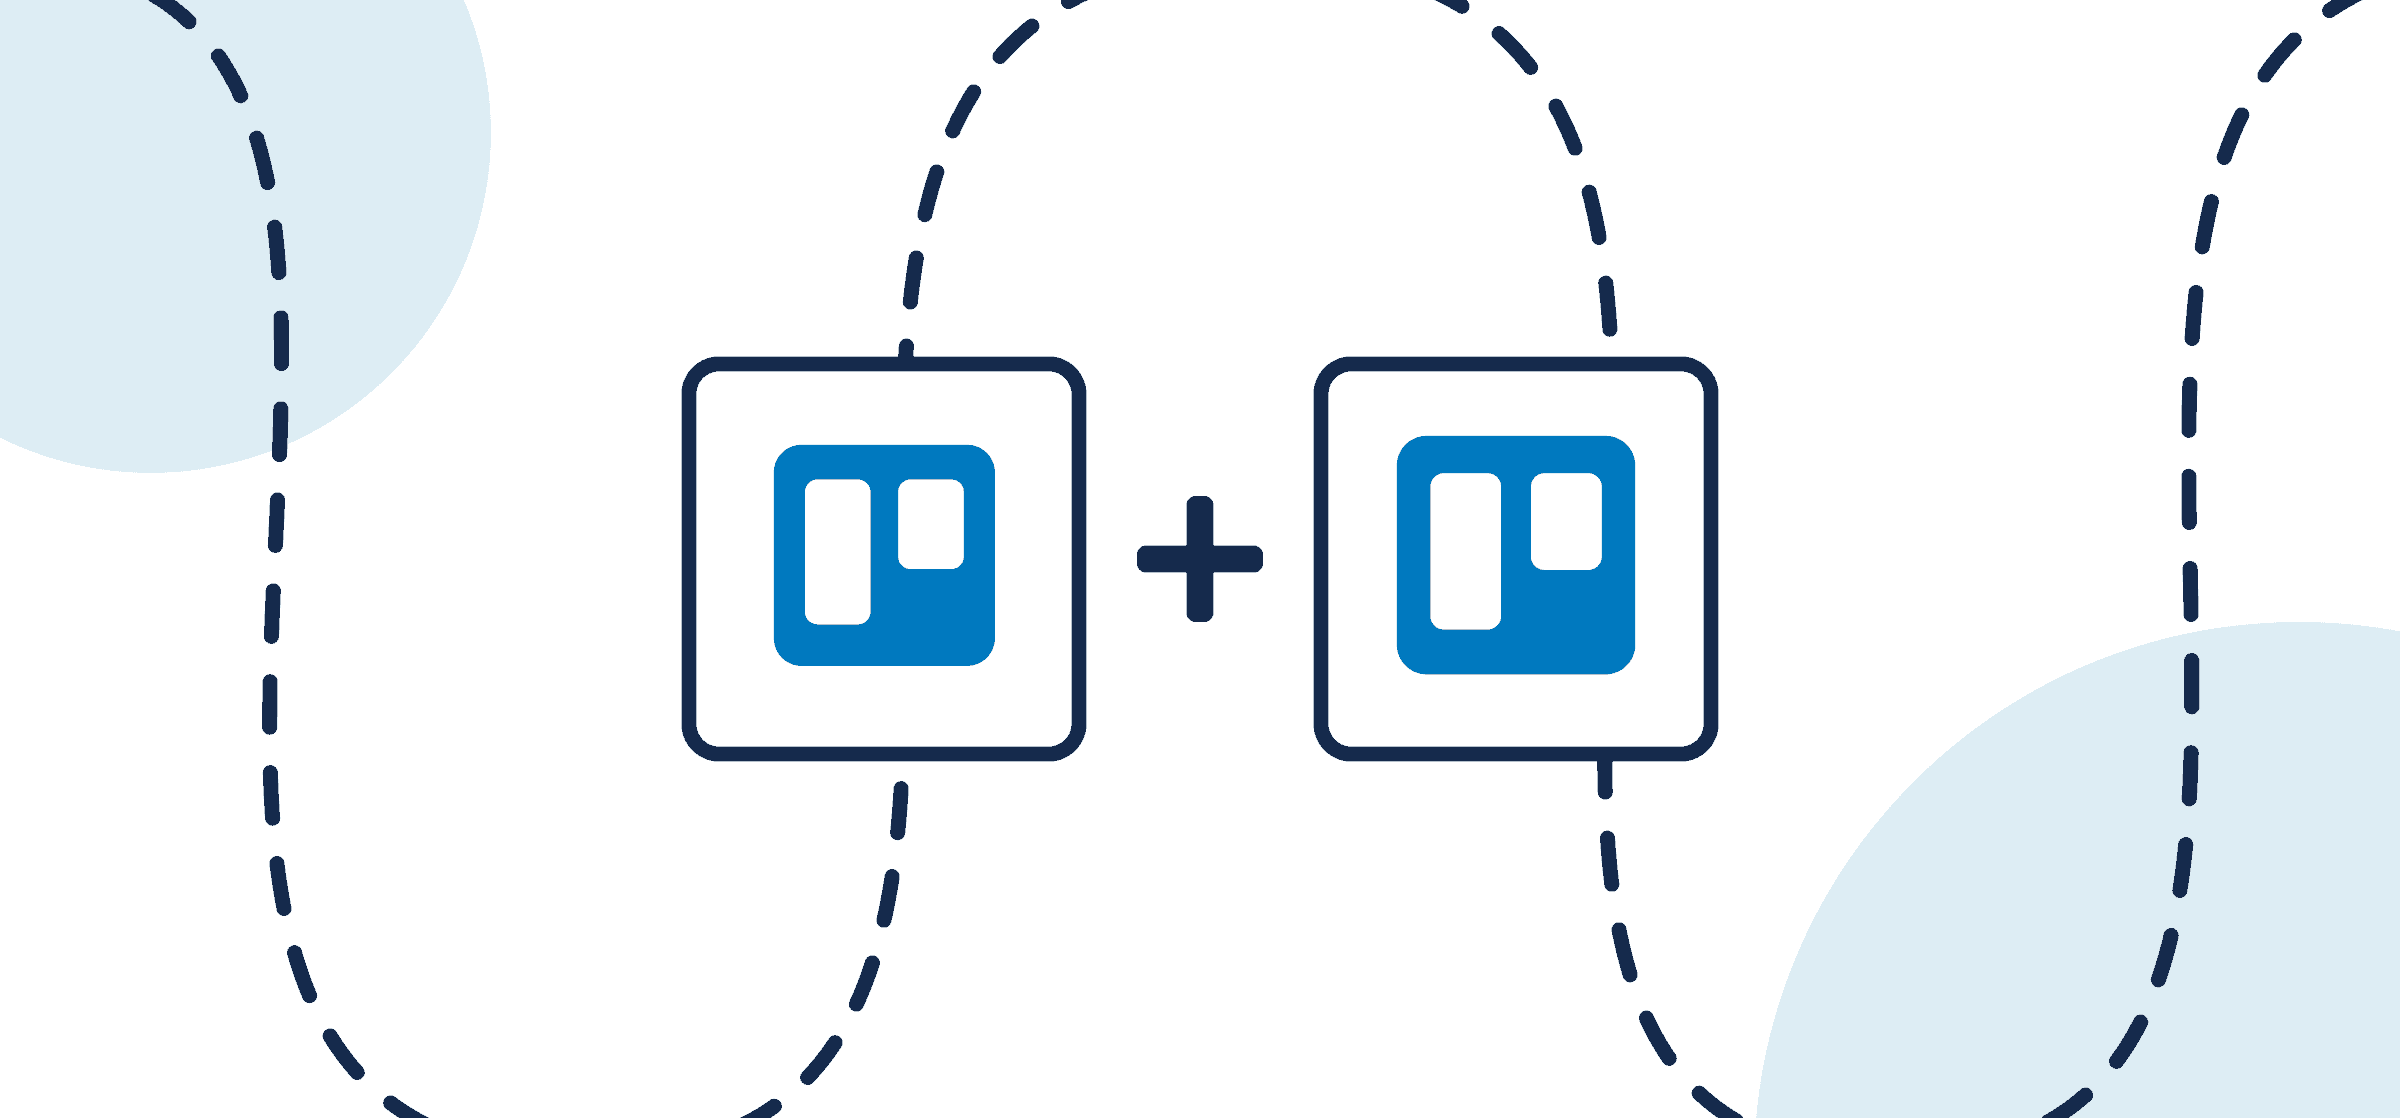 Featured image illustrating a step-by-step guide on syncing one Trello board to another through Unito, depicted by the connected Trello logos through circles and dotted lines.